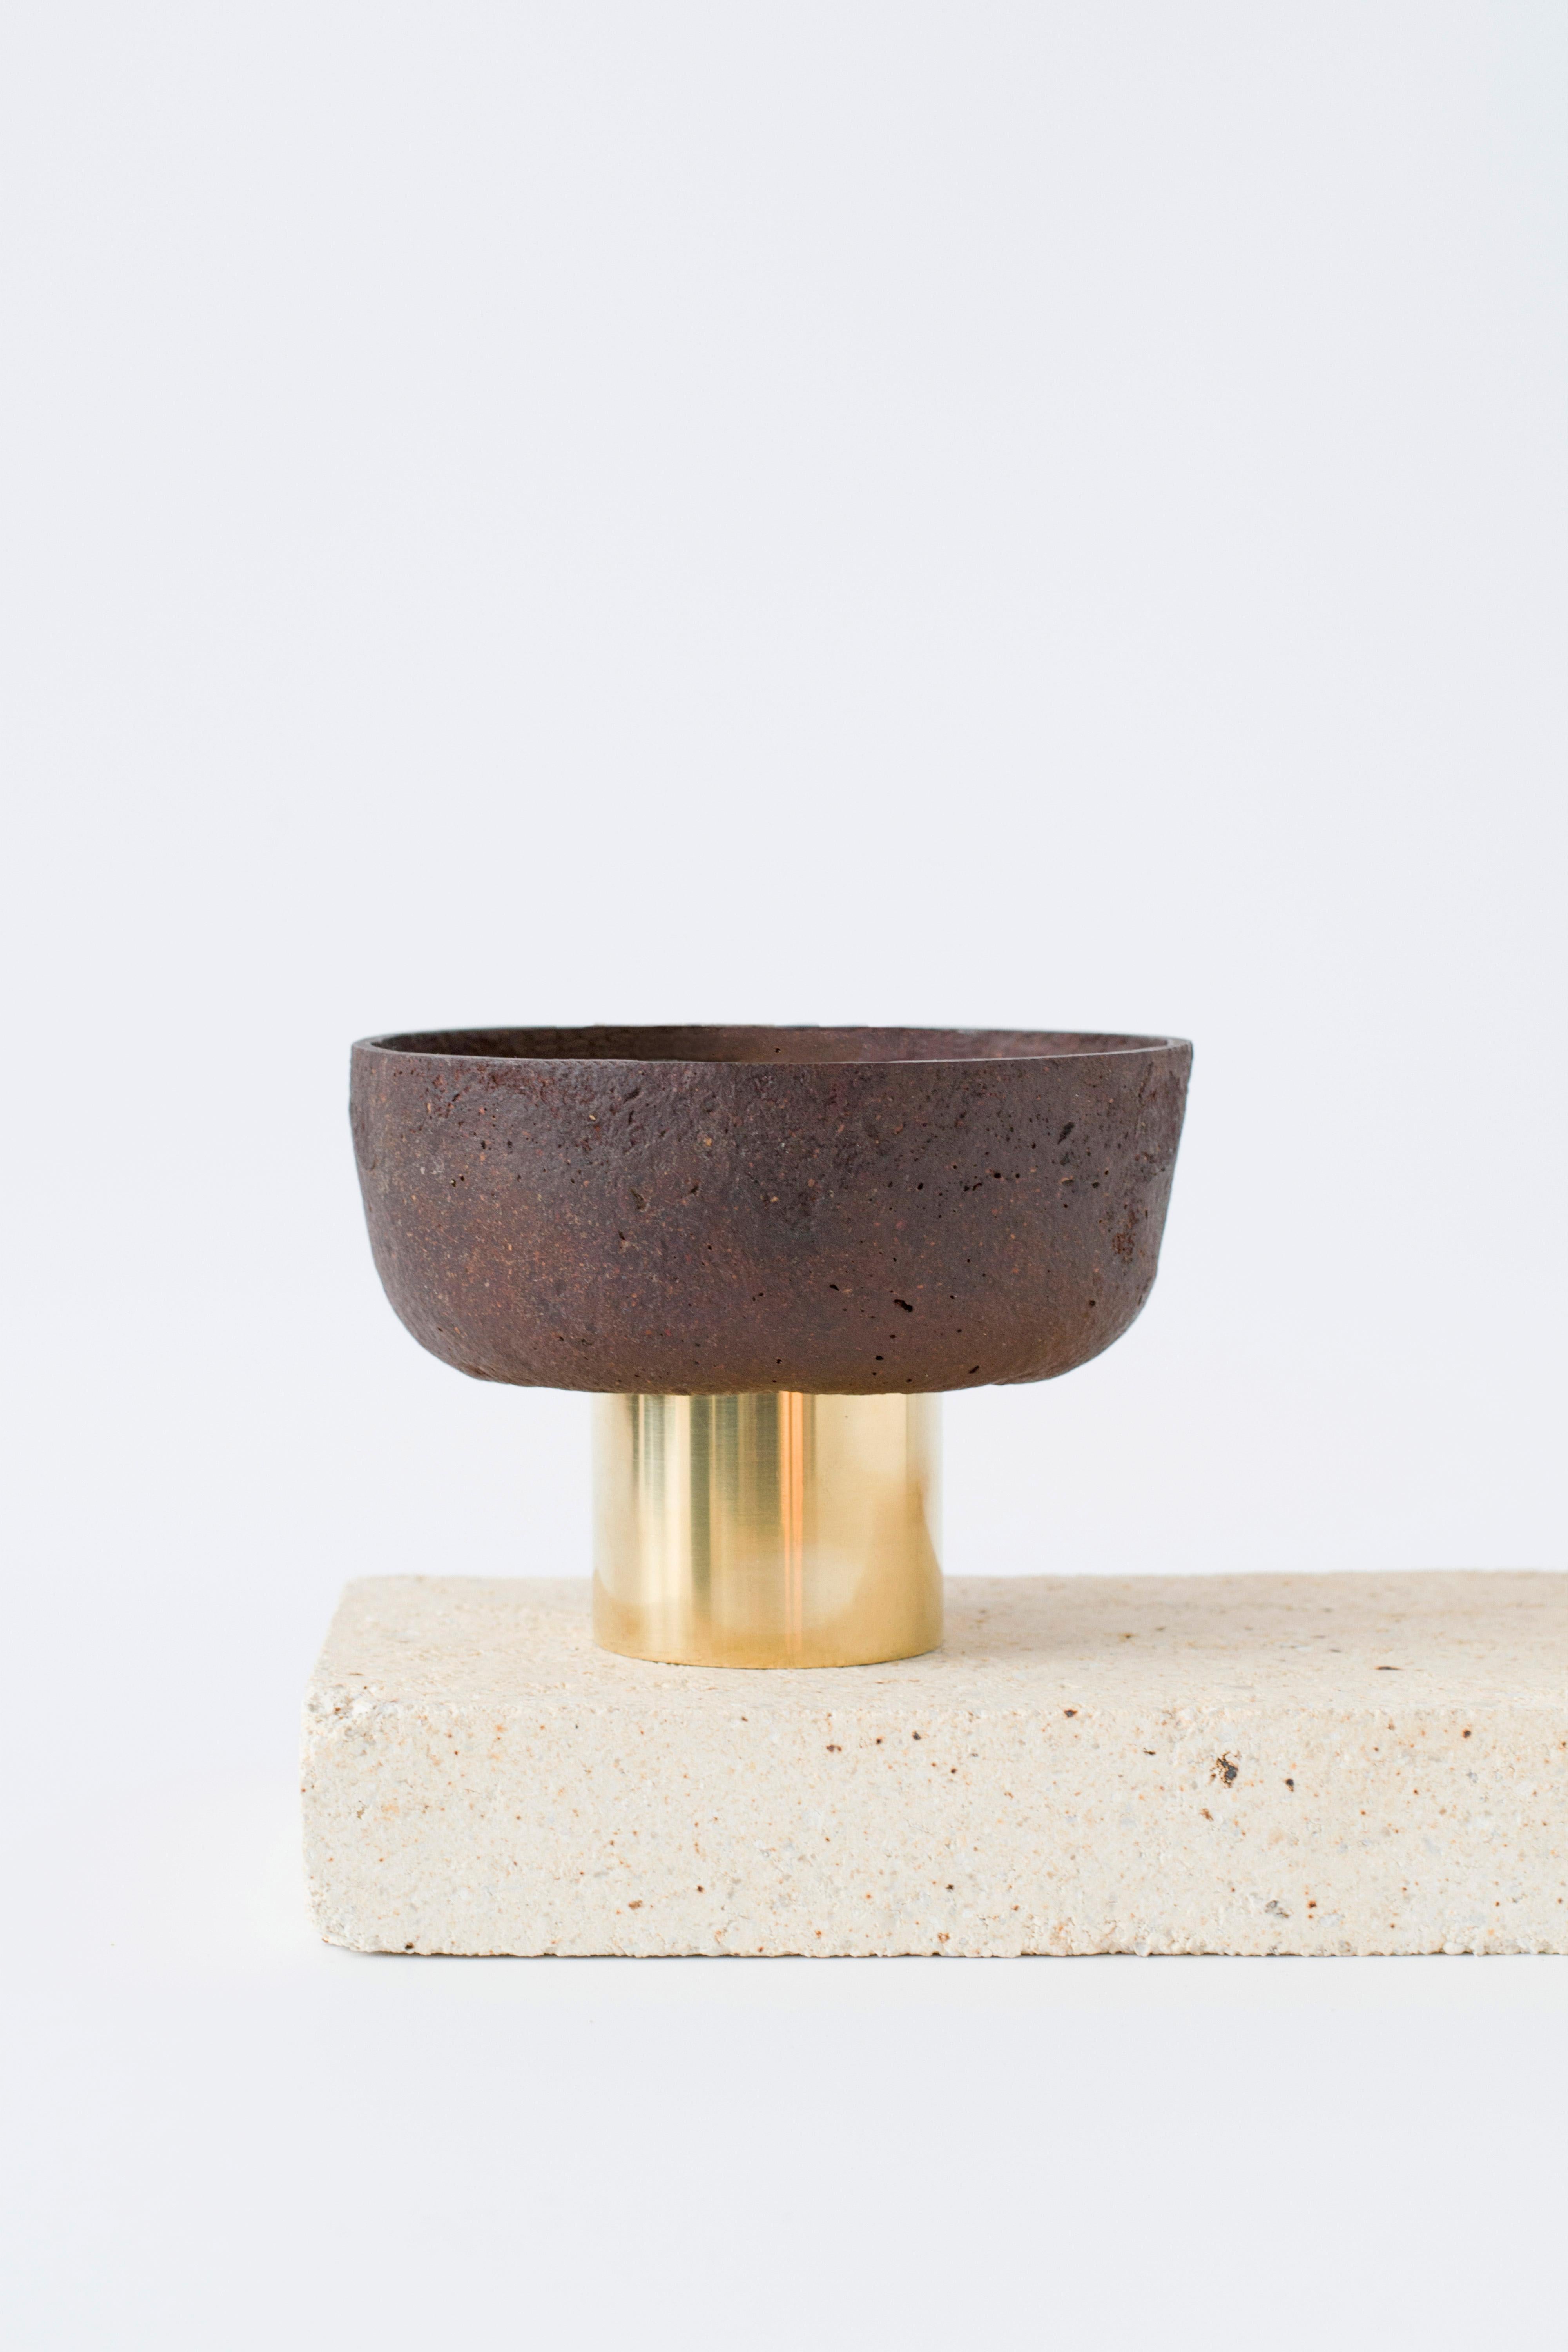 Pine pedestal bowl by Evelina Kudabaite Studio
Handmade
Materials: pine, brass
Dimensions: H 7.5 mm x D 12 mm
Colour: reddish
Notes: for dry use

Since 2015, product designer Evelina Kudabaite keeps on developing and making GIRIA objects.